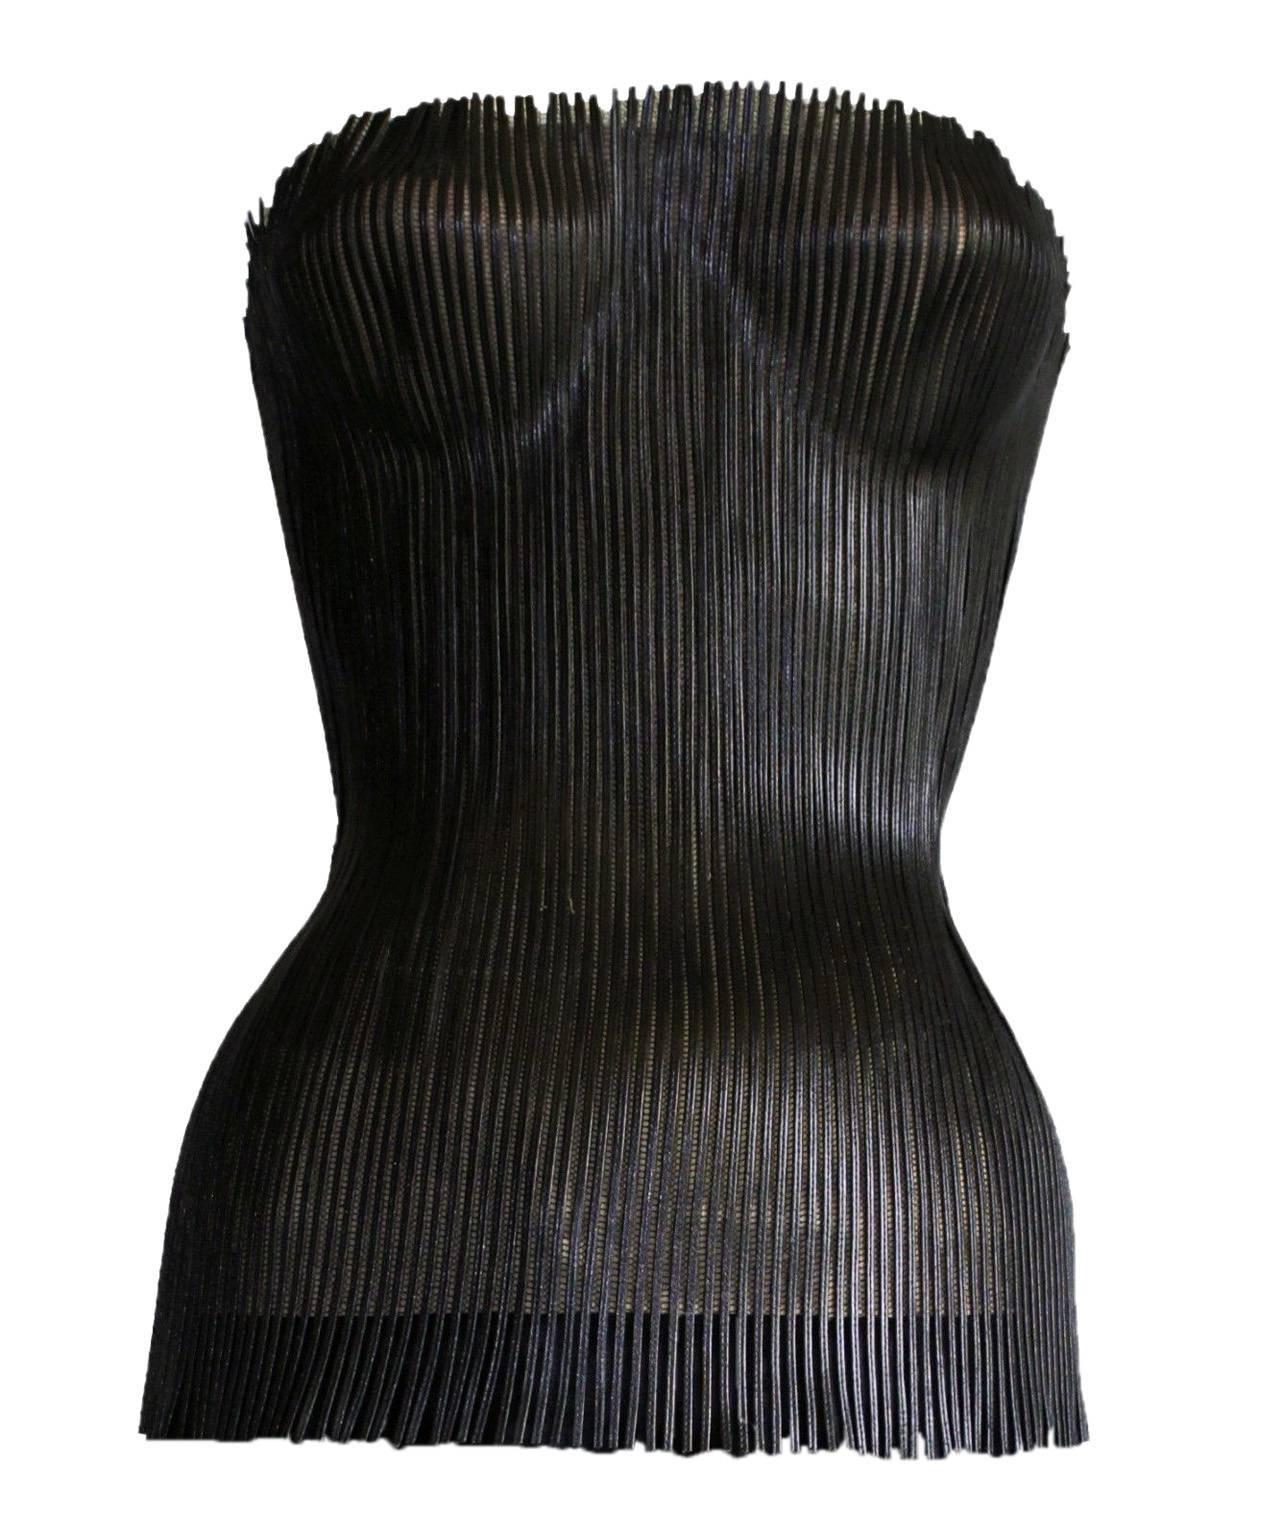 That Iconic & Amazing Tom Ford Gucci SS 2001 Black Leather Nude Corset Runway Top!

Who could ever forget that incredible nude corset top with the tulle overlay covered with black leather strips from Tom Ford's incredible spring/summer 2001